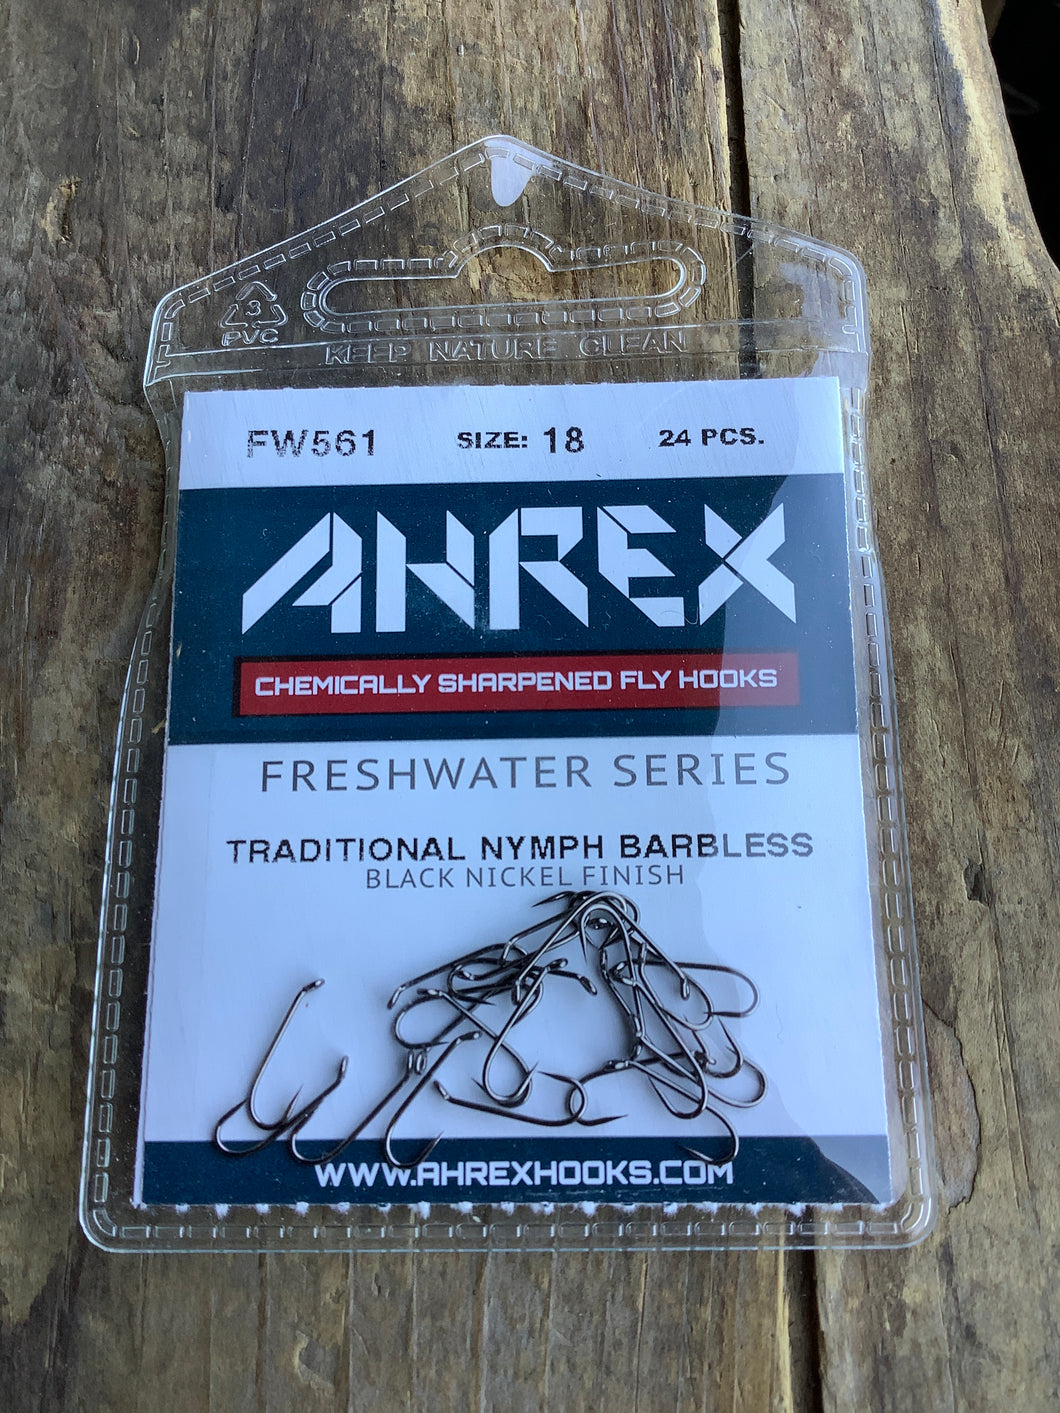 Ahrex FW561 Barbless Traditional Nymph Hook